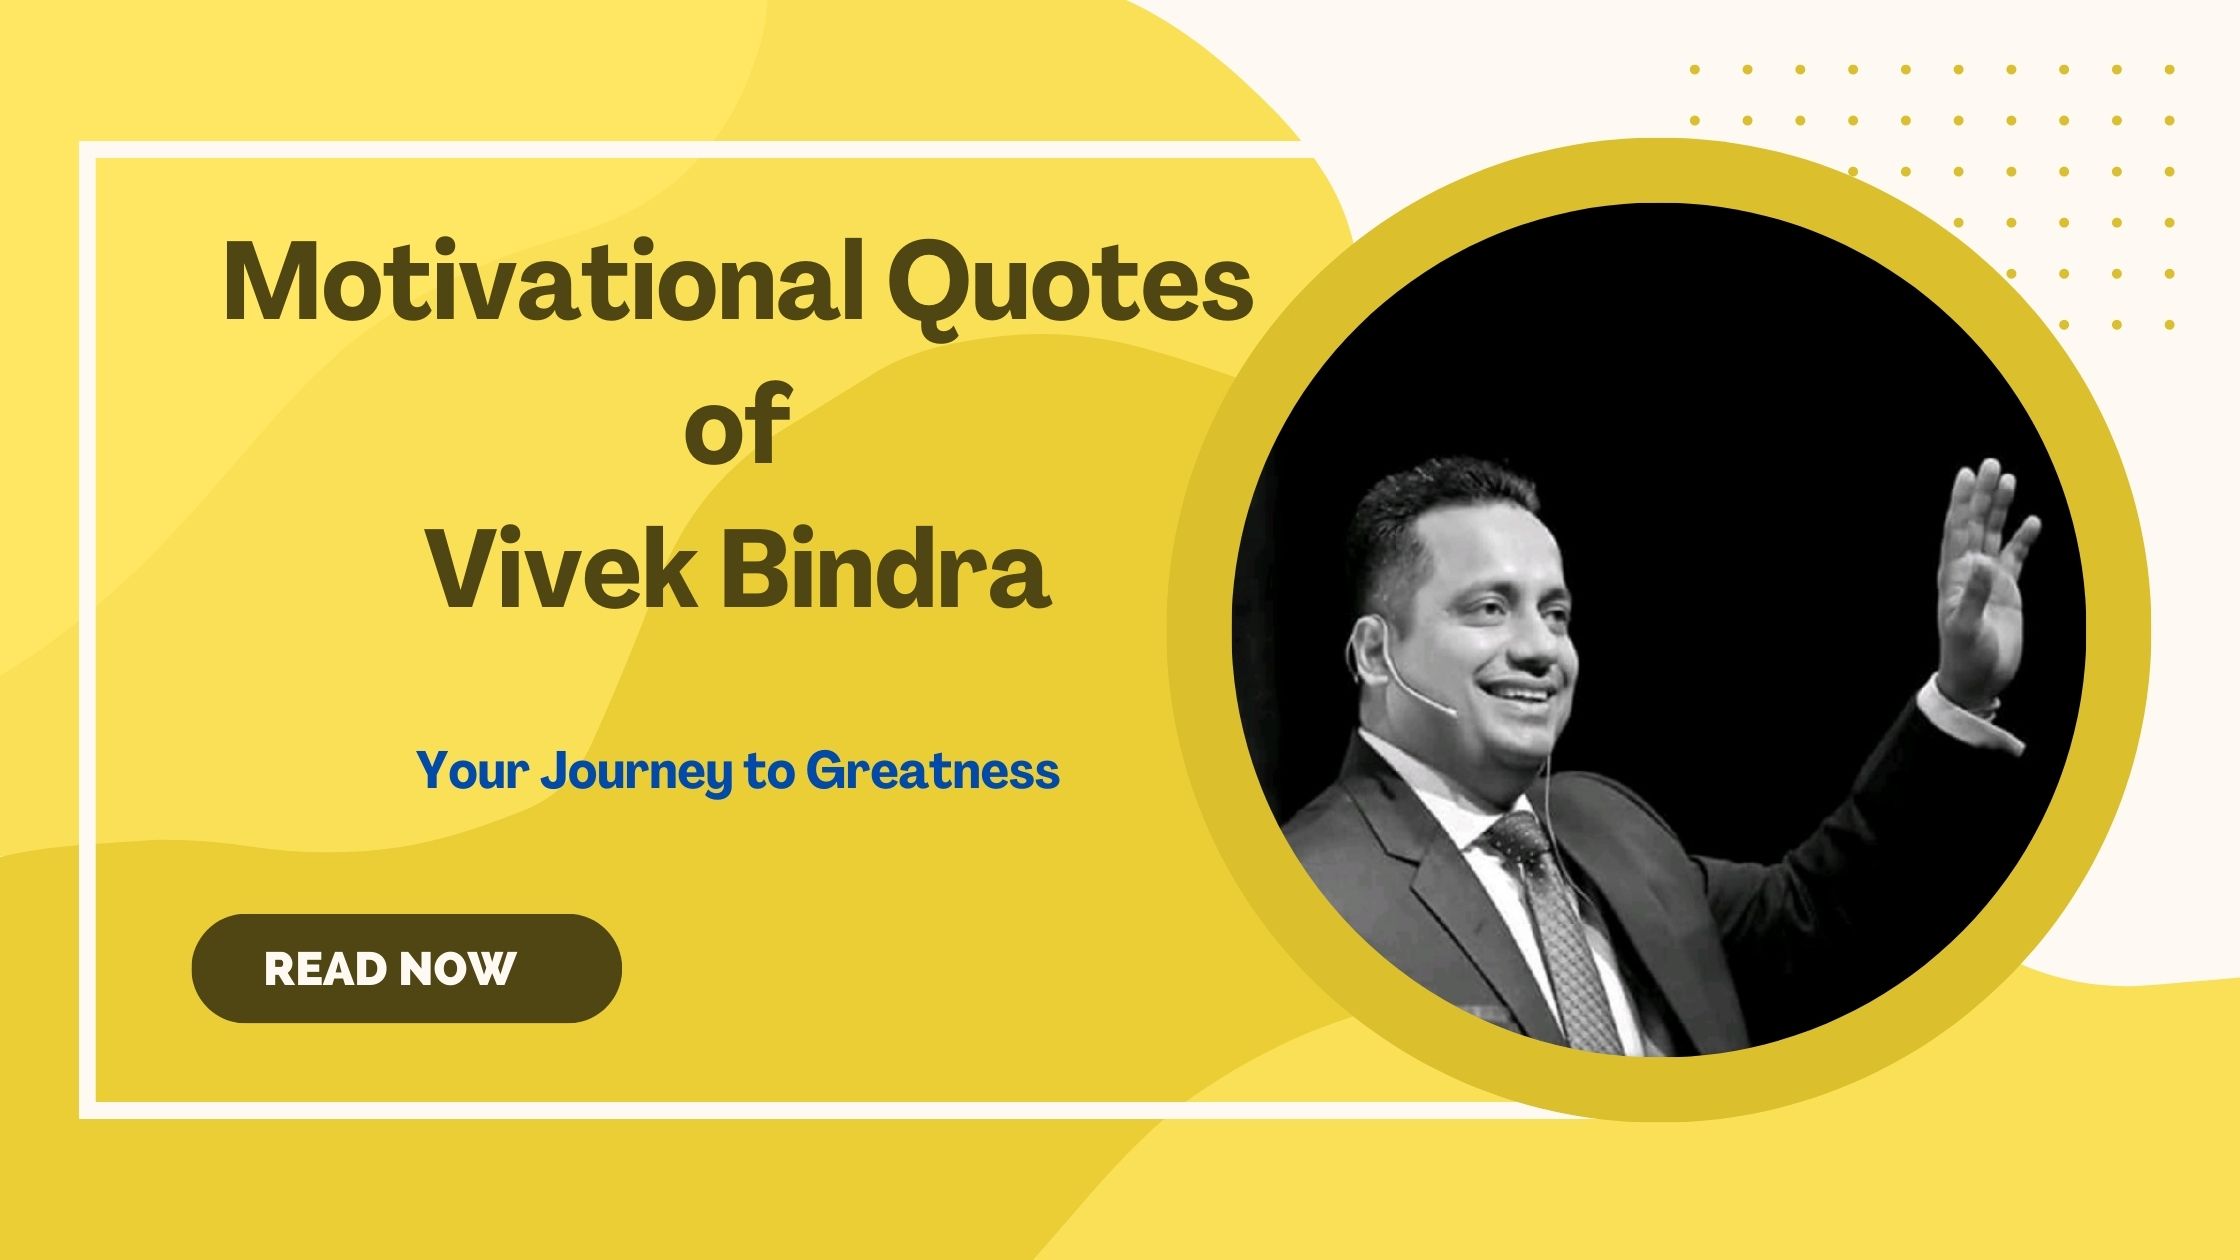 Motivational Quotes of Vivek Bindra